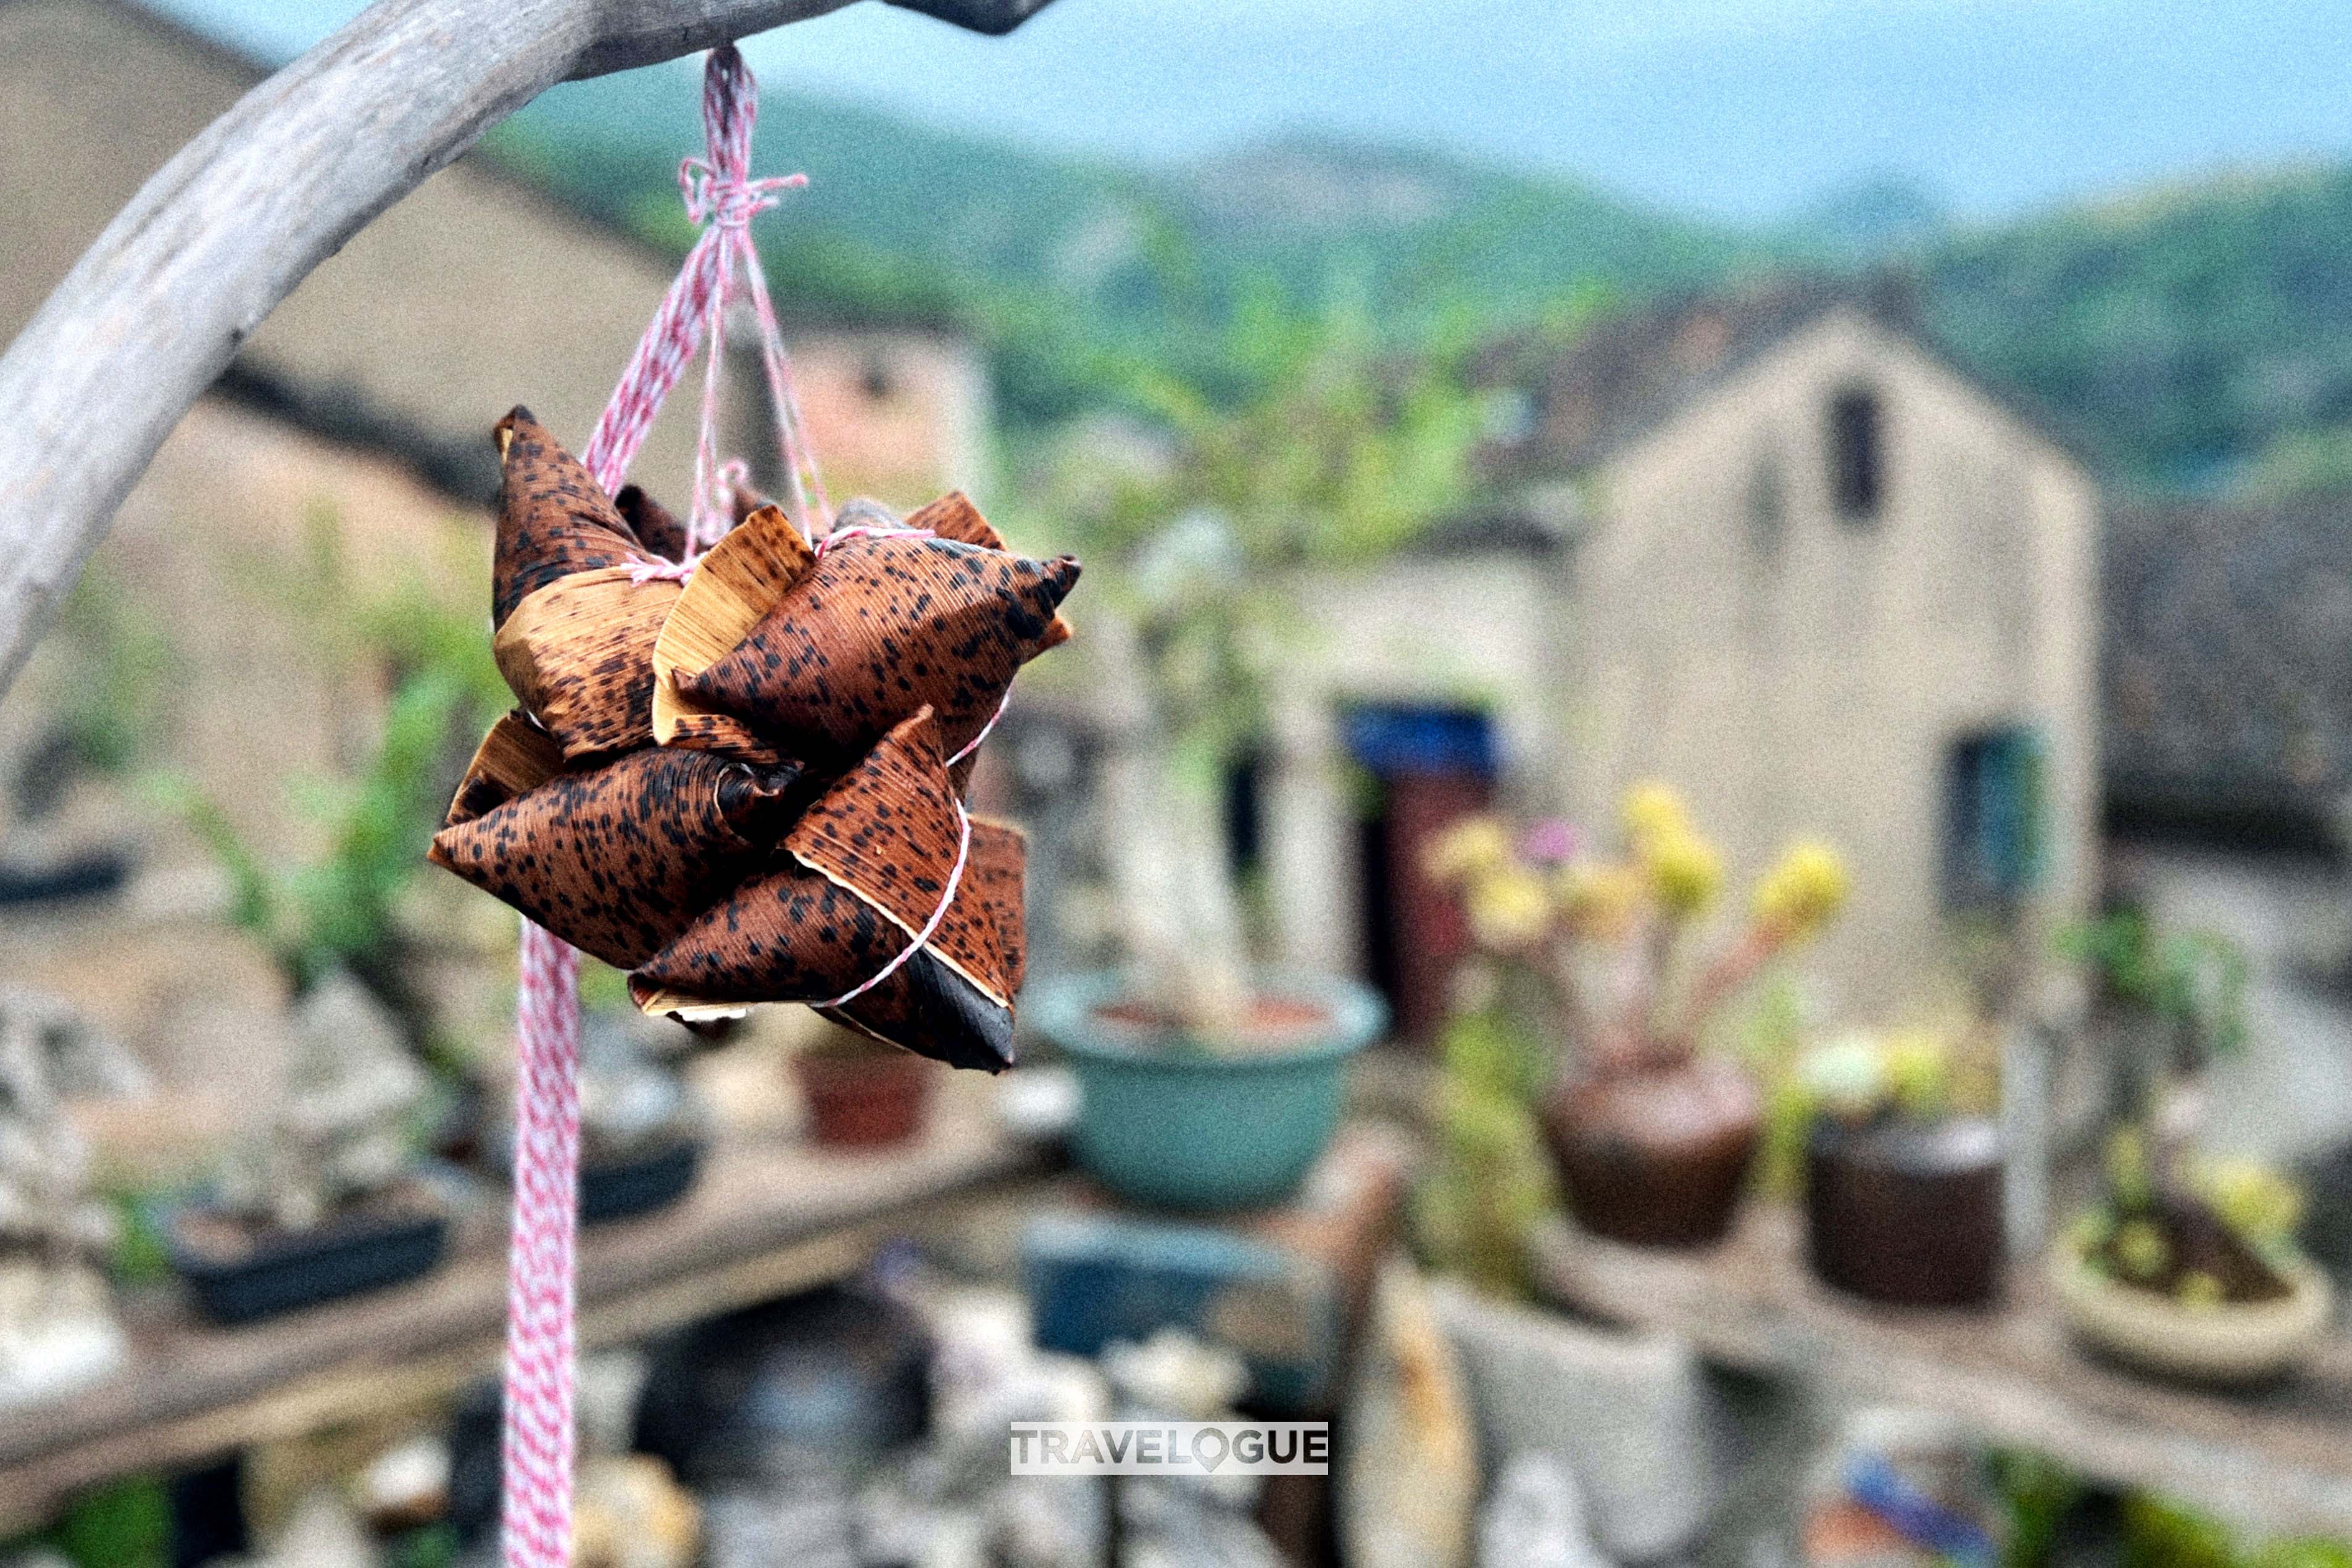 Zongzi in Fuding, Fujian Province are wrapped in bamboo leaves that have a striking natural leopard-spot pattern. /CGTN